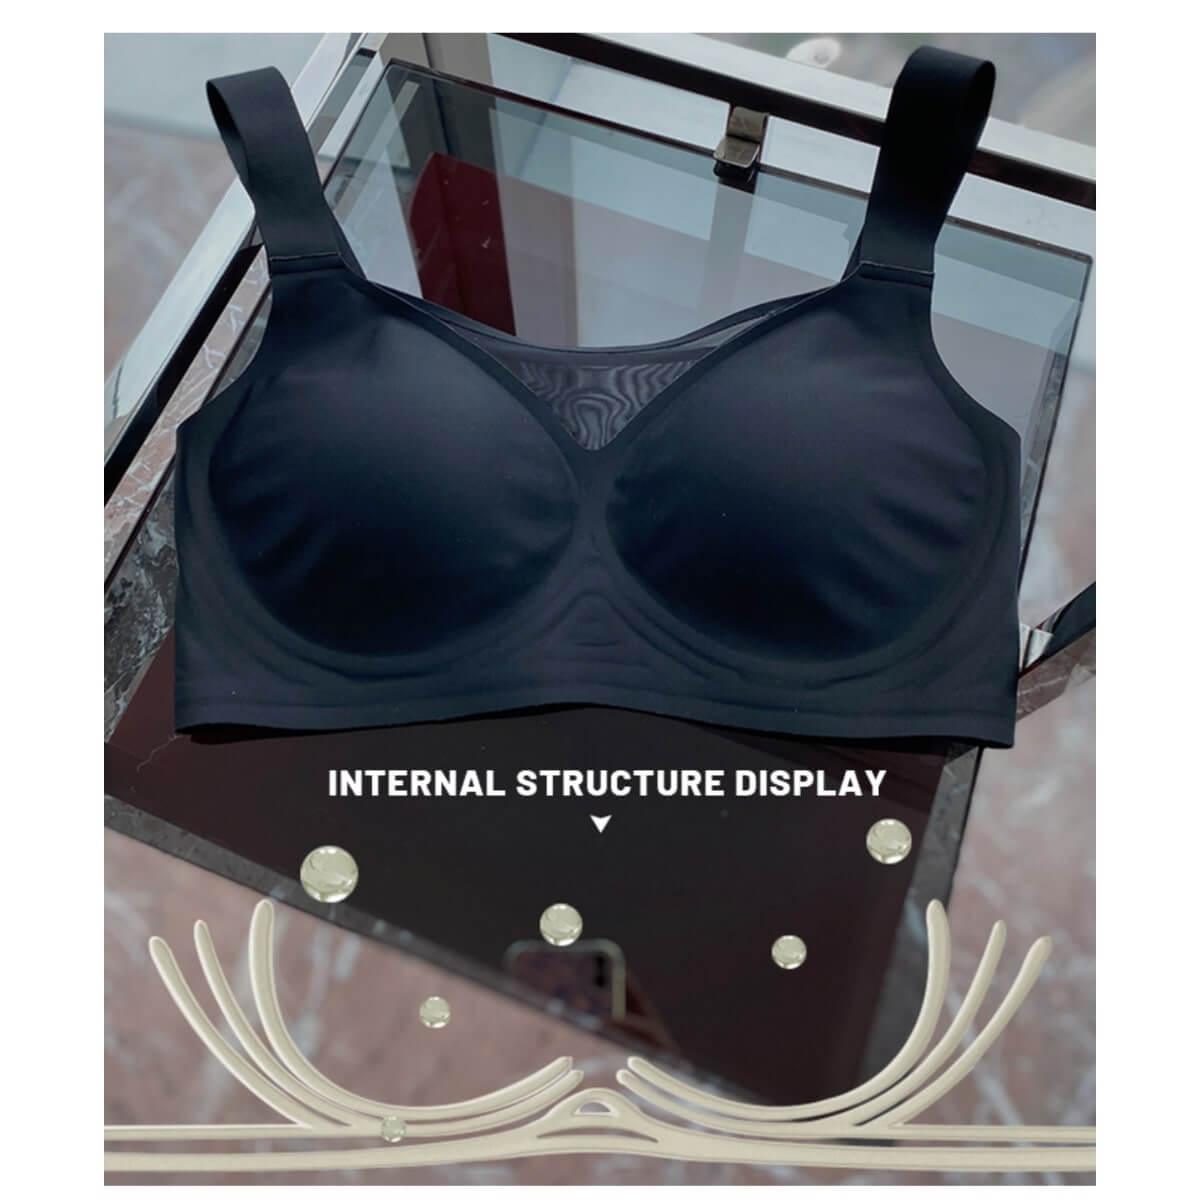 Seamless Comfort Bras for F Cup